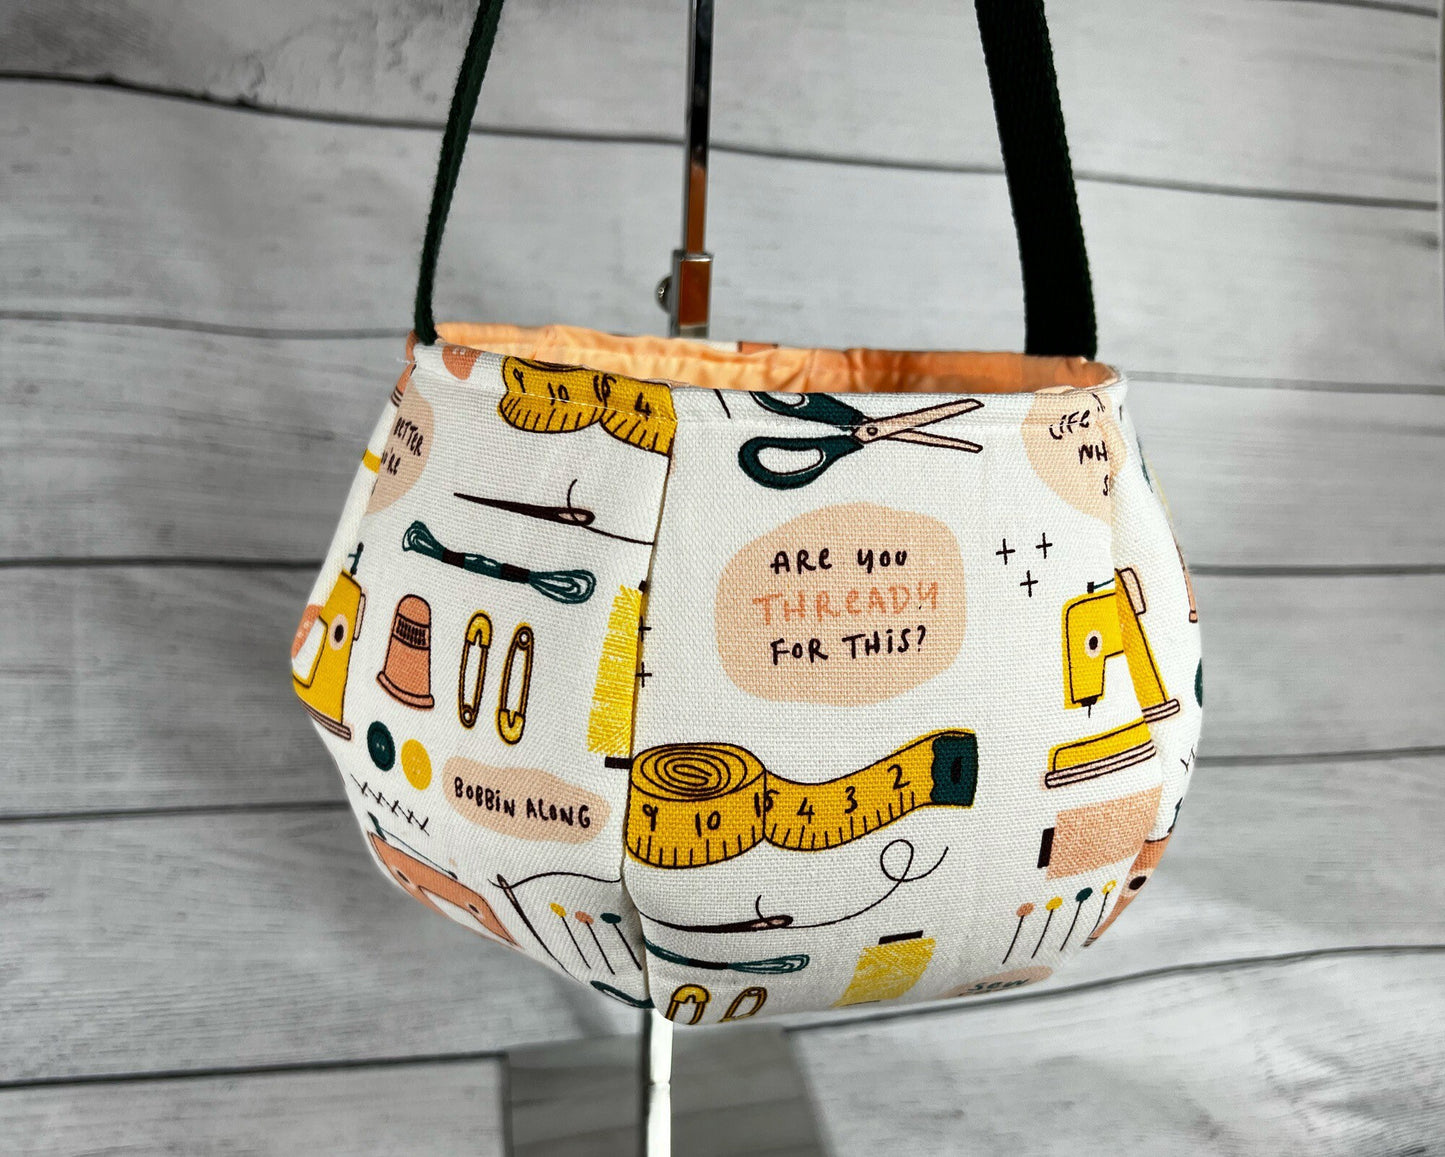 Sewing Pun Tote Bag - Thread - Sewing Machine - Needles - Machine - Kids - Everyday - Holiday - Easter - Halloween - Party - Gift